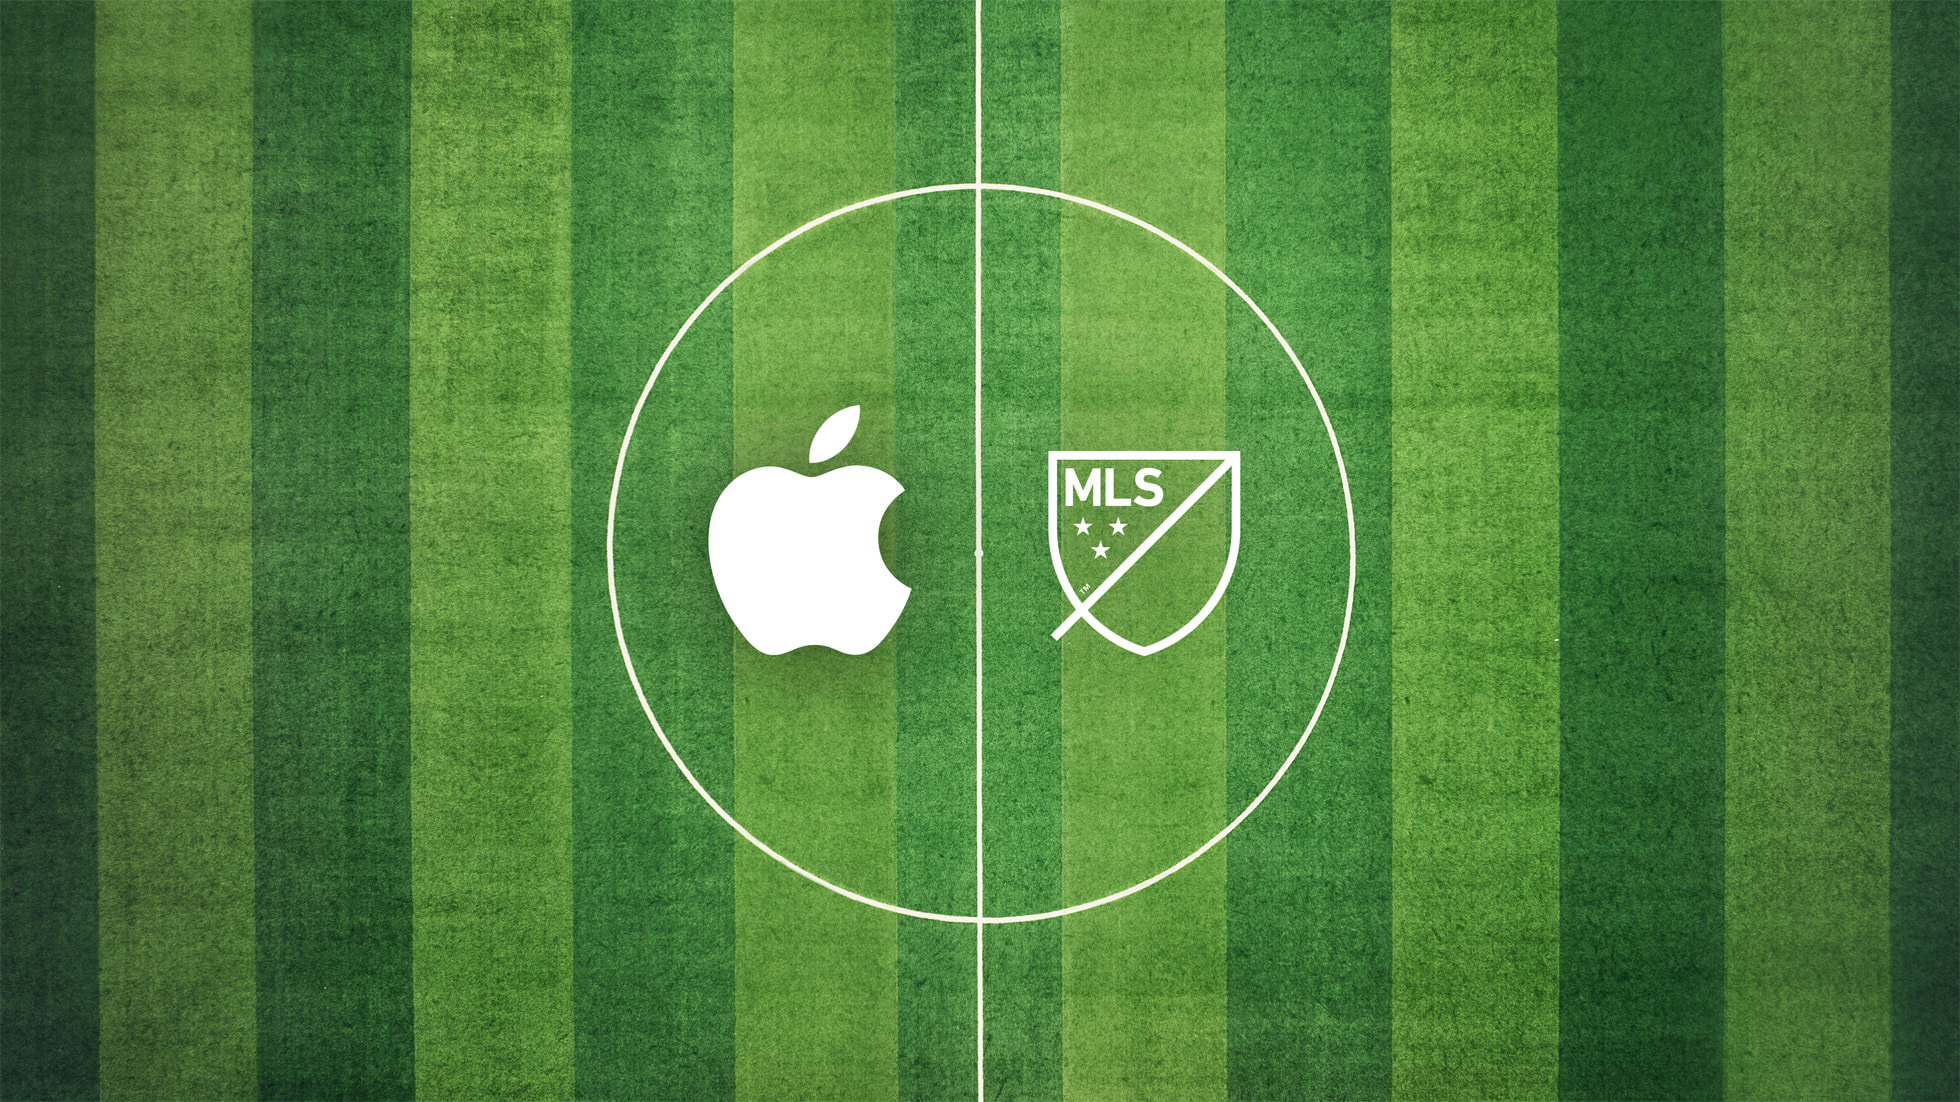 Apple TV to Be Exclusive Home of Major League Soccer Starting in 2023